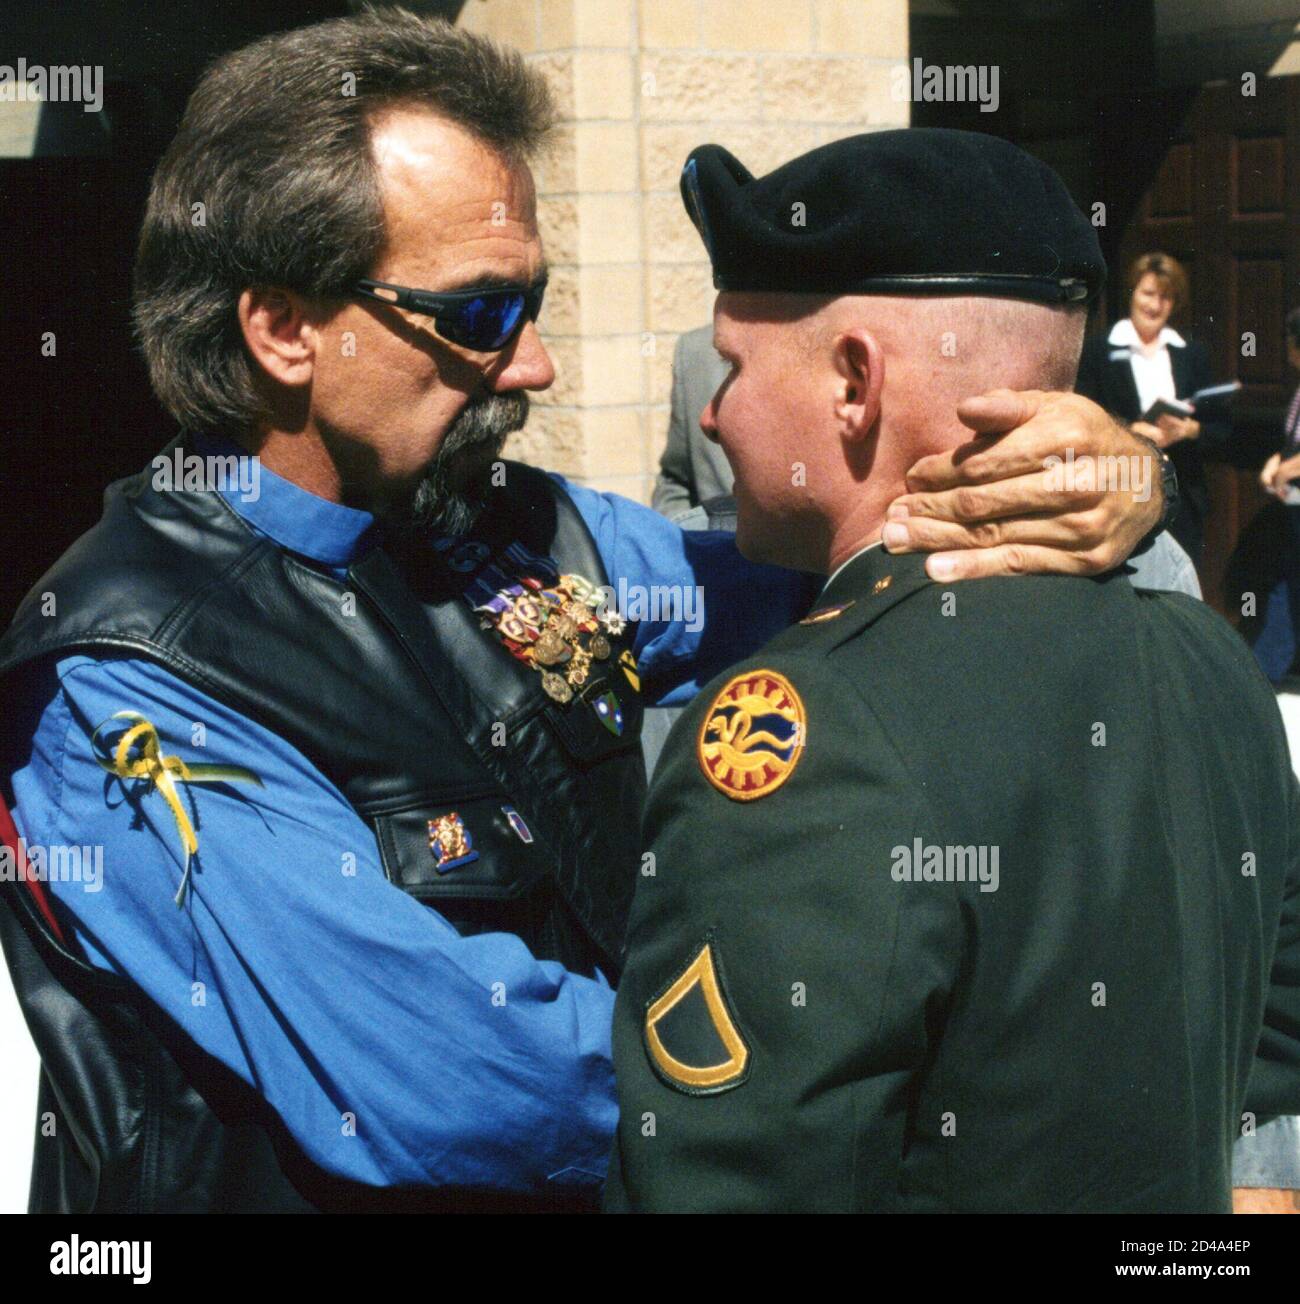 Tom Titus (L) greets a soldier during the funeral of his son, U.S. Soldier Brandon Titus, in Boise, Idaho, August 30, 2004. Tom Titus, experienced the shock of watching his best friend die in his arms during the Vietnam War in 1971. On Monday, the ex-Army Ranger felt the even greater horror of burying his only son Brandon, 20, killed on August 17 by an explosion while patrolling a Baghdad slum. Such a scene of grief has played out nearly 1,000 times since the United States invaded Iraq last year. Yet Americans rarely hear much about their fallen soldiers, who typically appear as a name or phot Stock Photo